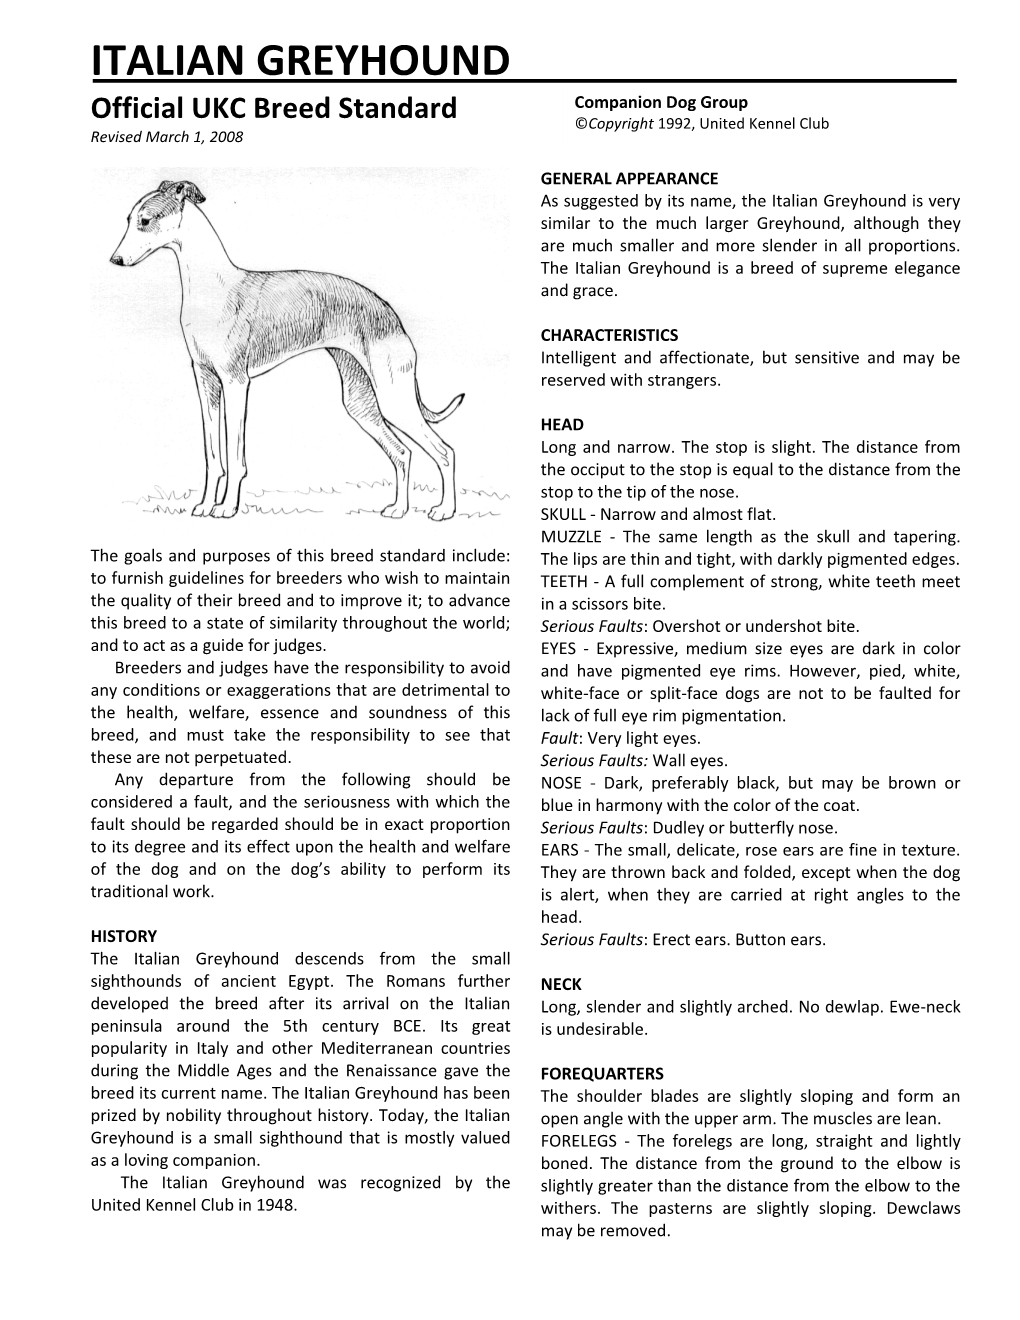 ITALIAN GREYHOUND Companion Dog Group Official UKC Breed Standard ©Copyright 1992, United Kennel Club Revised March 1, 2008